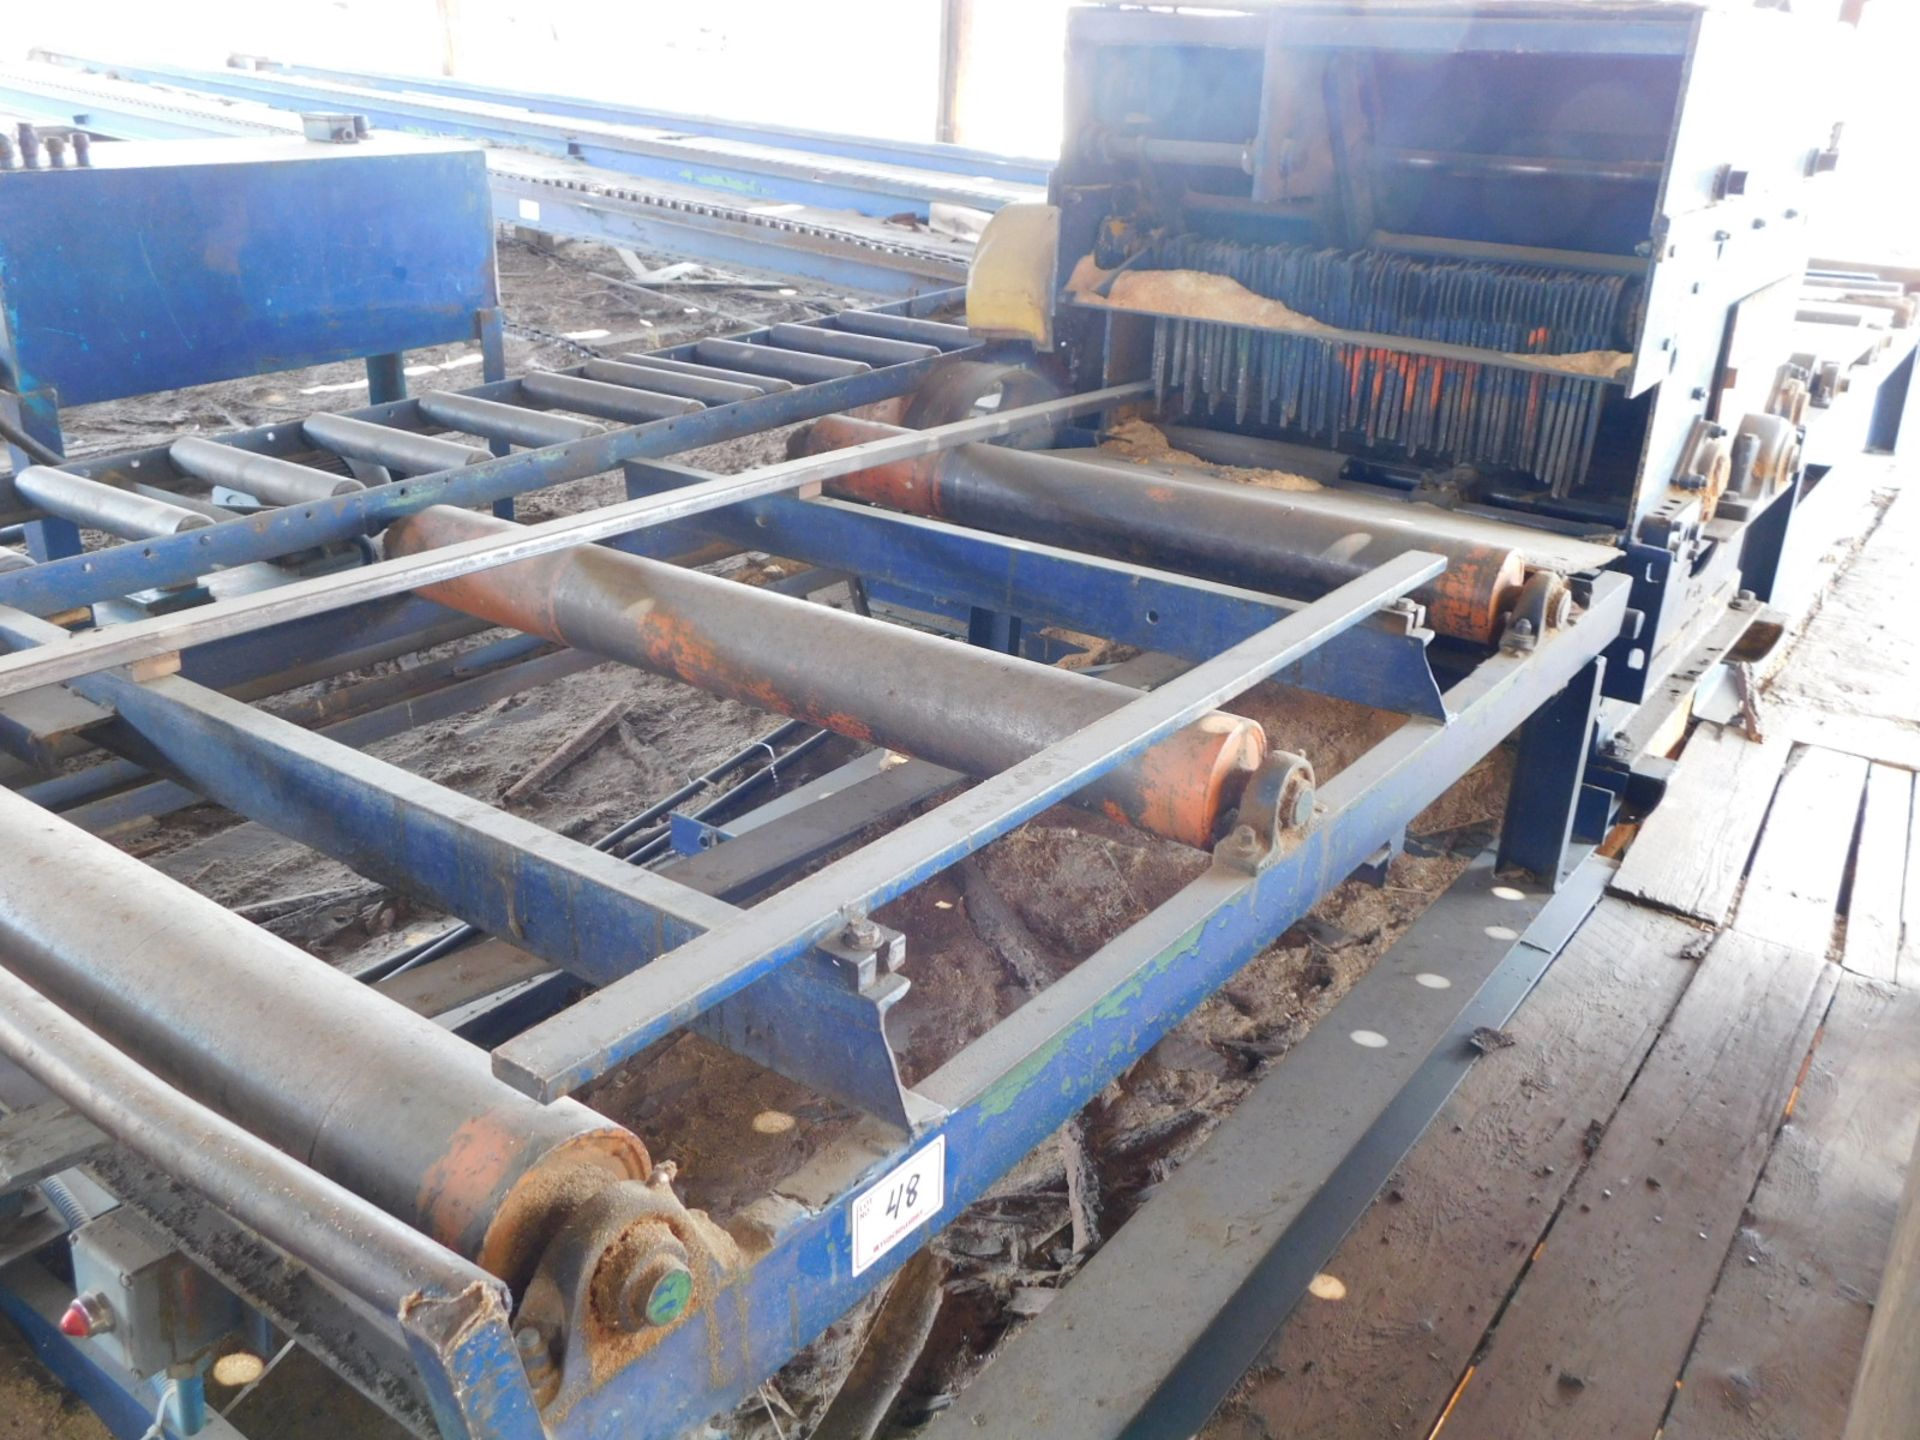 37" X 6" EDGER, (2) & (3) SAW CLUSTERS, 50" X 7'6" INFEED ROLLCASE W/ LINE BAR, 50" X 8' OUTFEED